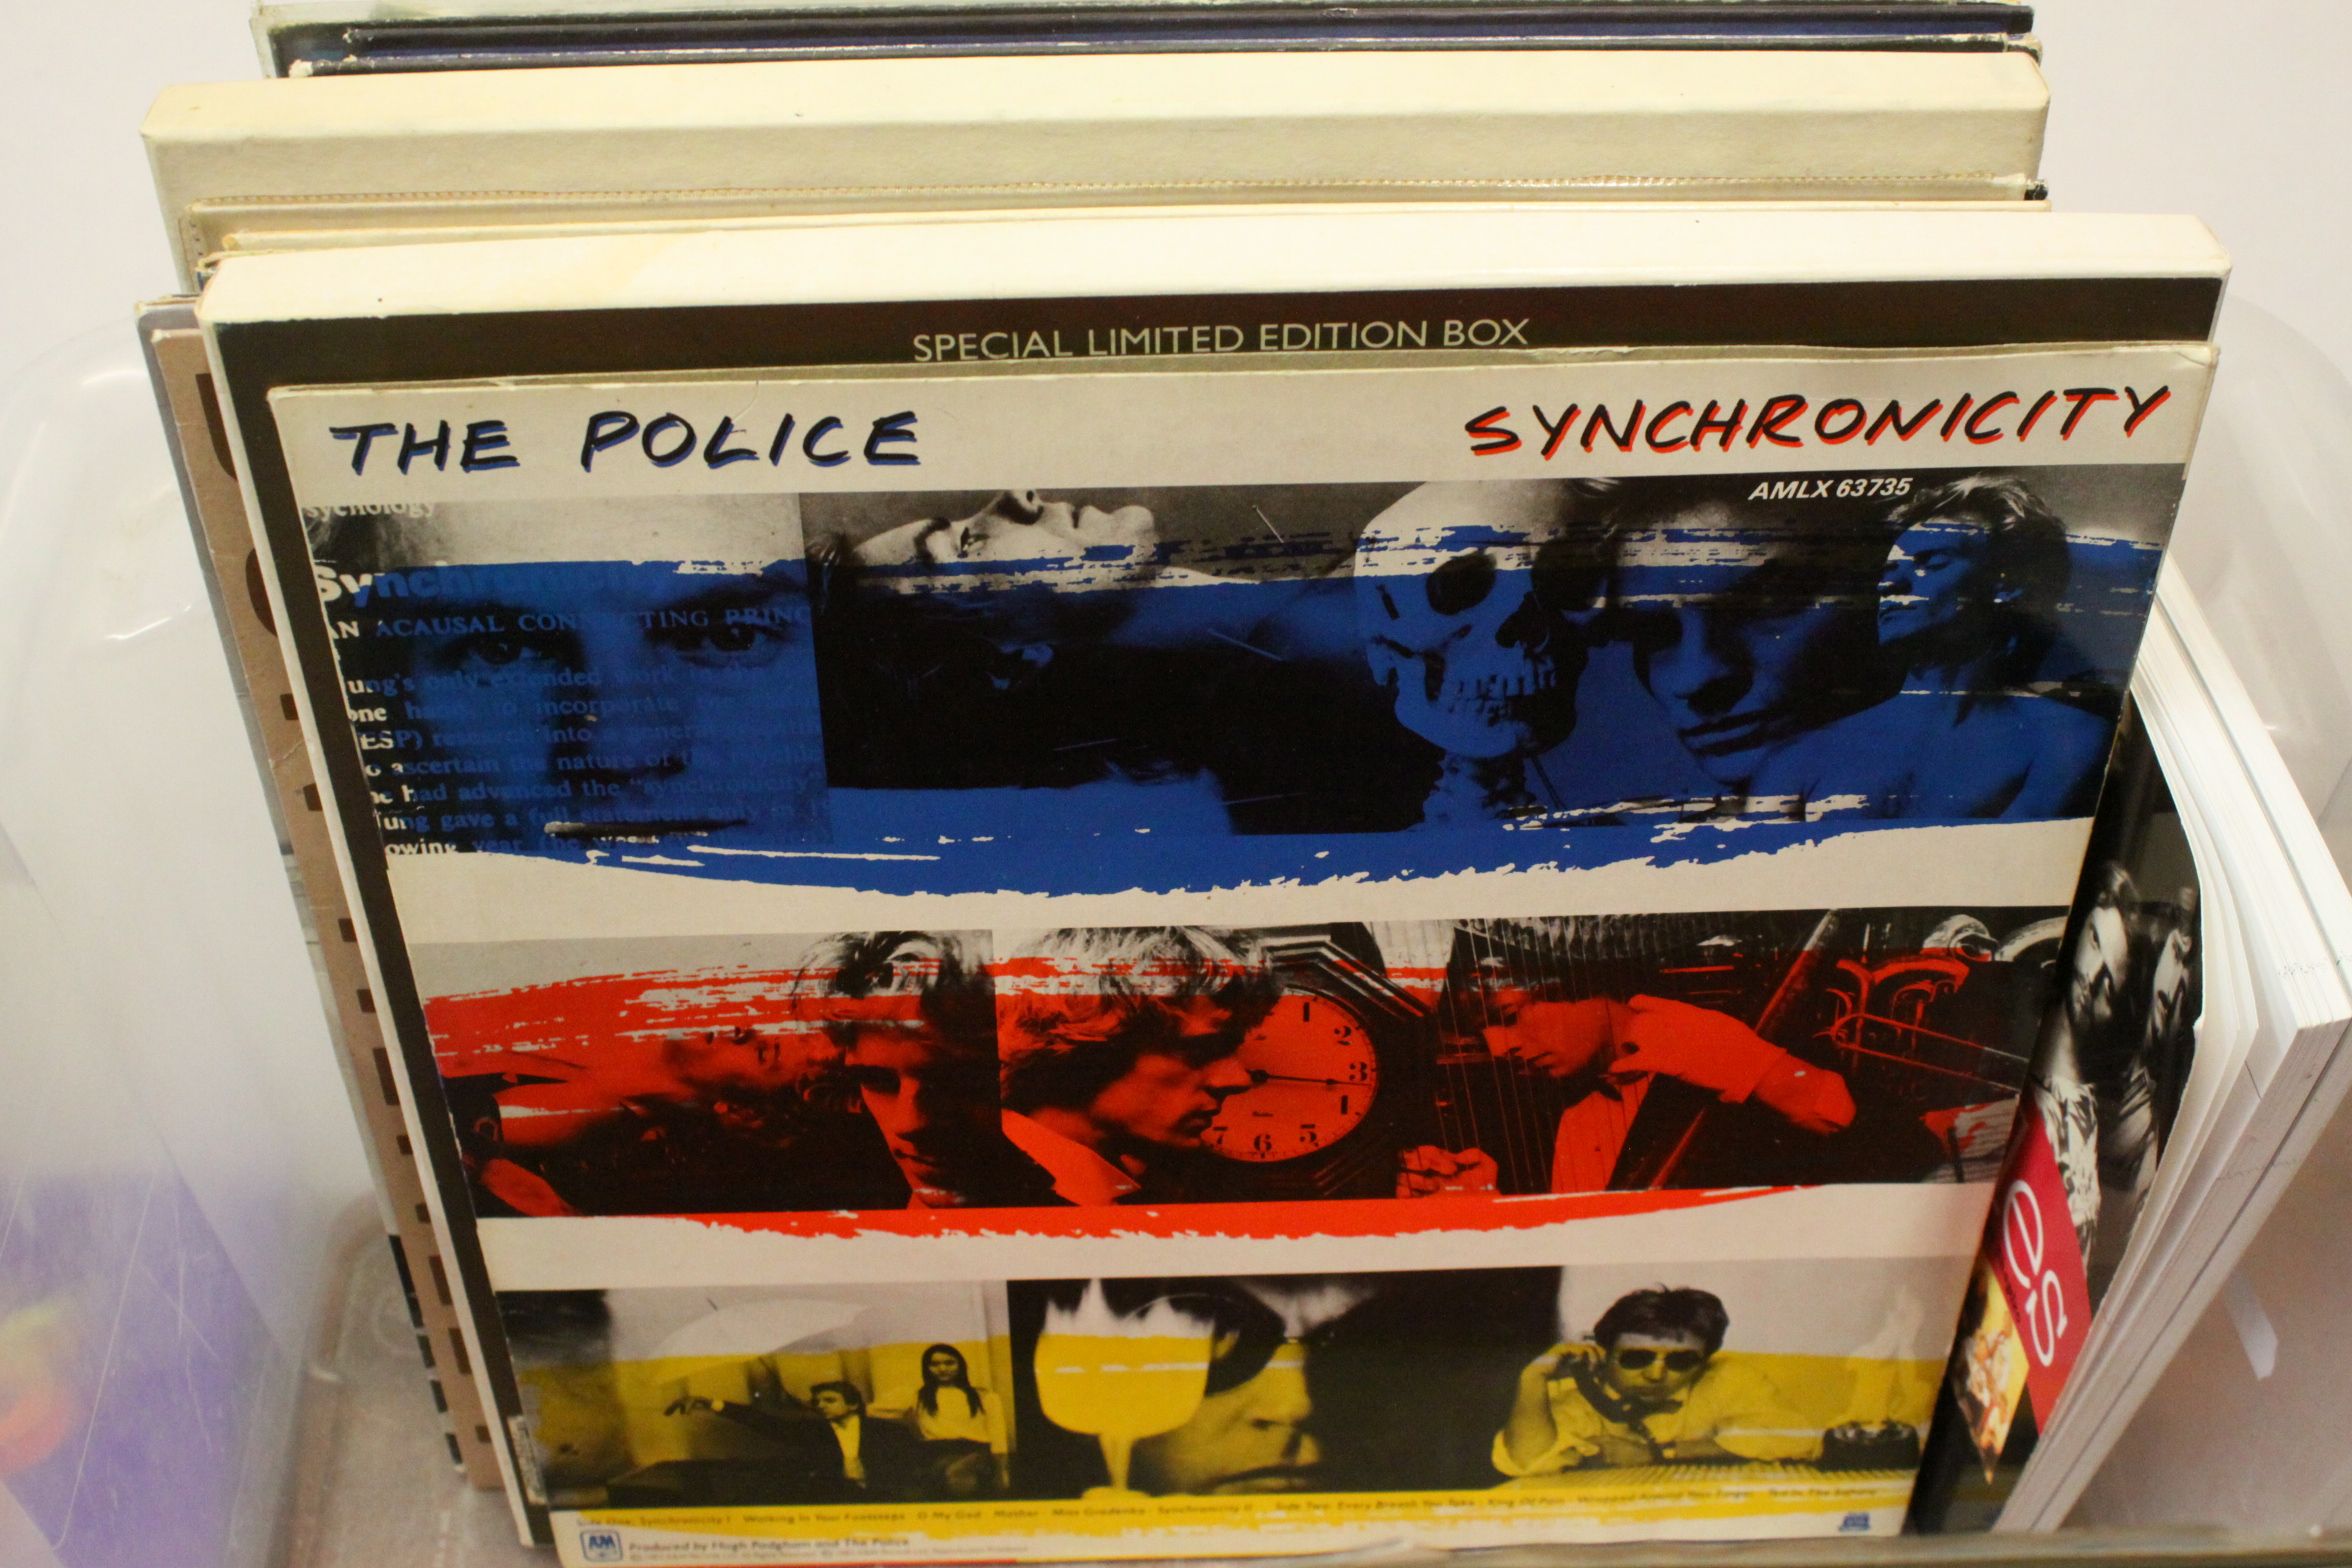 Vinyl - Around 30 LPs & 12" singles to include The Who My Generation on Brunswick LAT8616, Roxy - Image 4 of 8